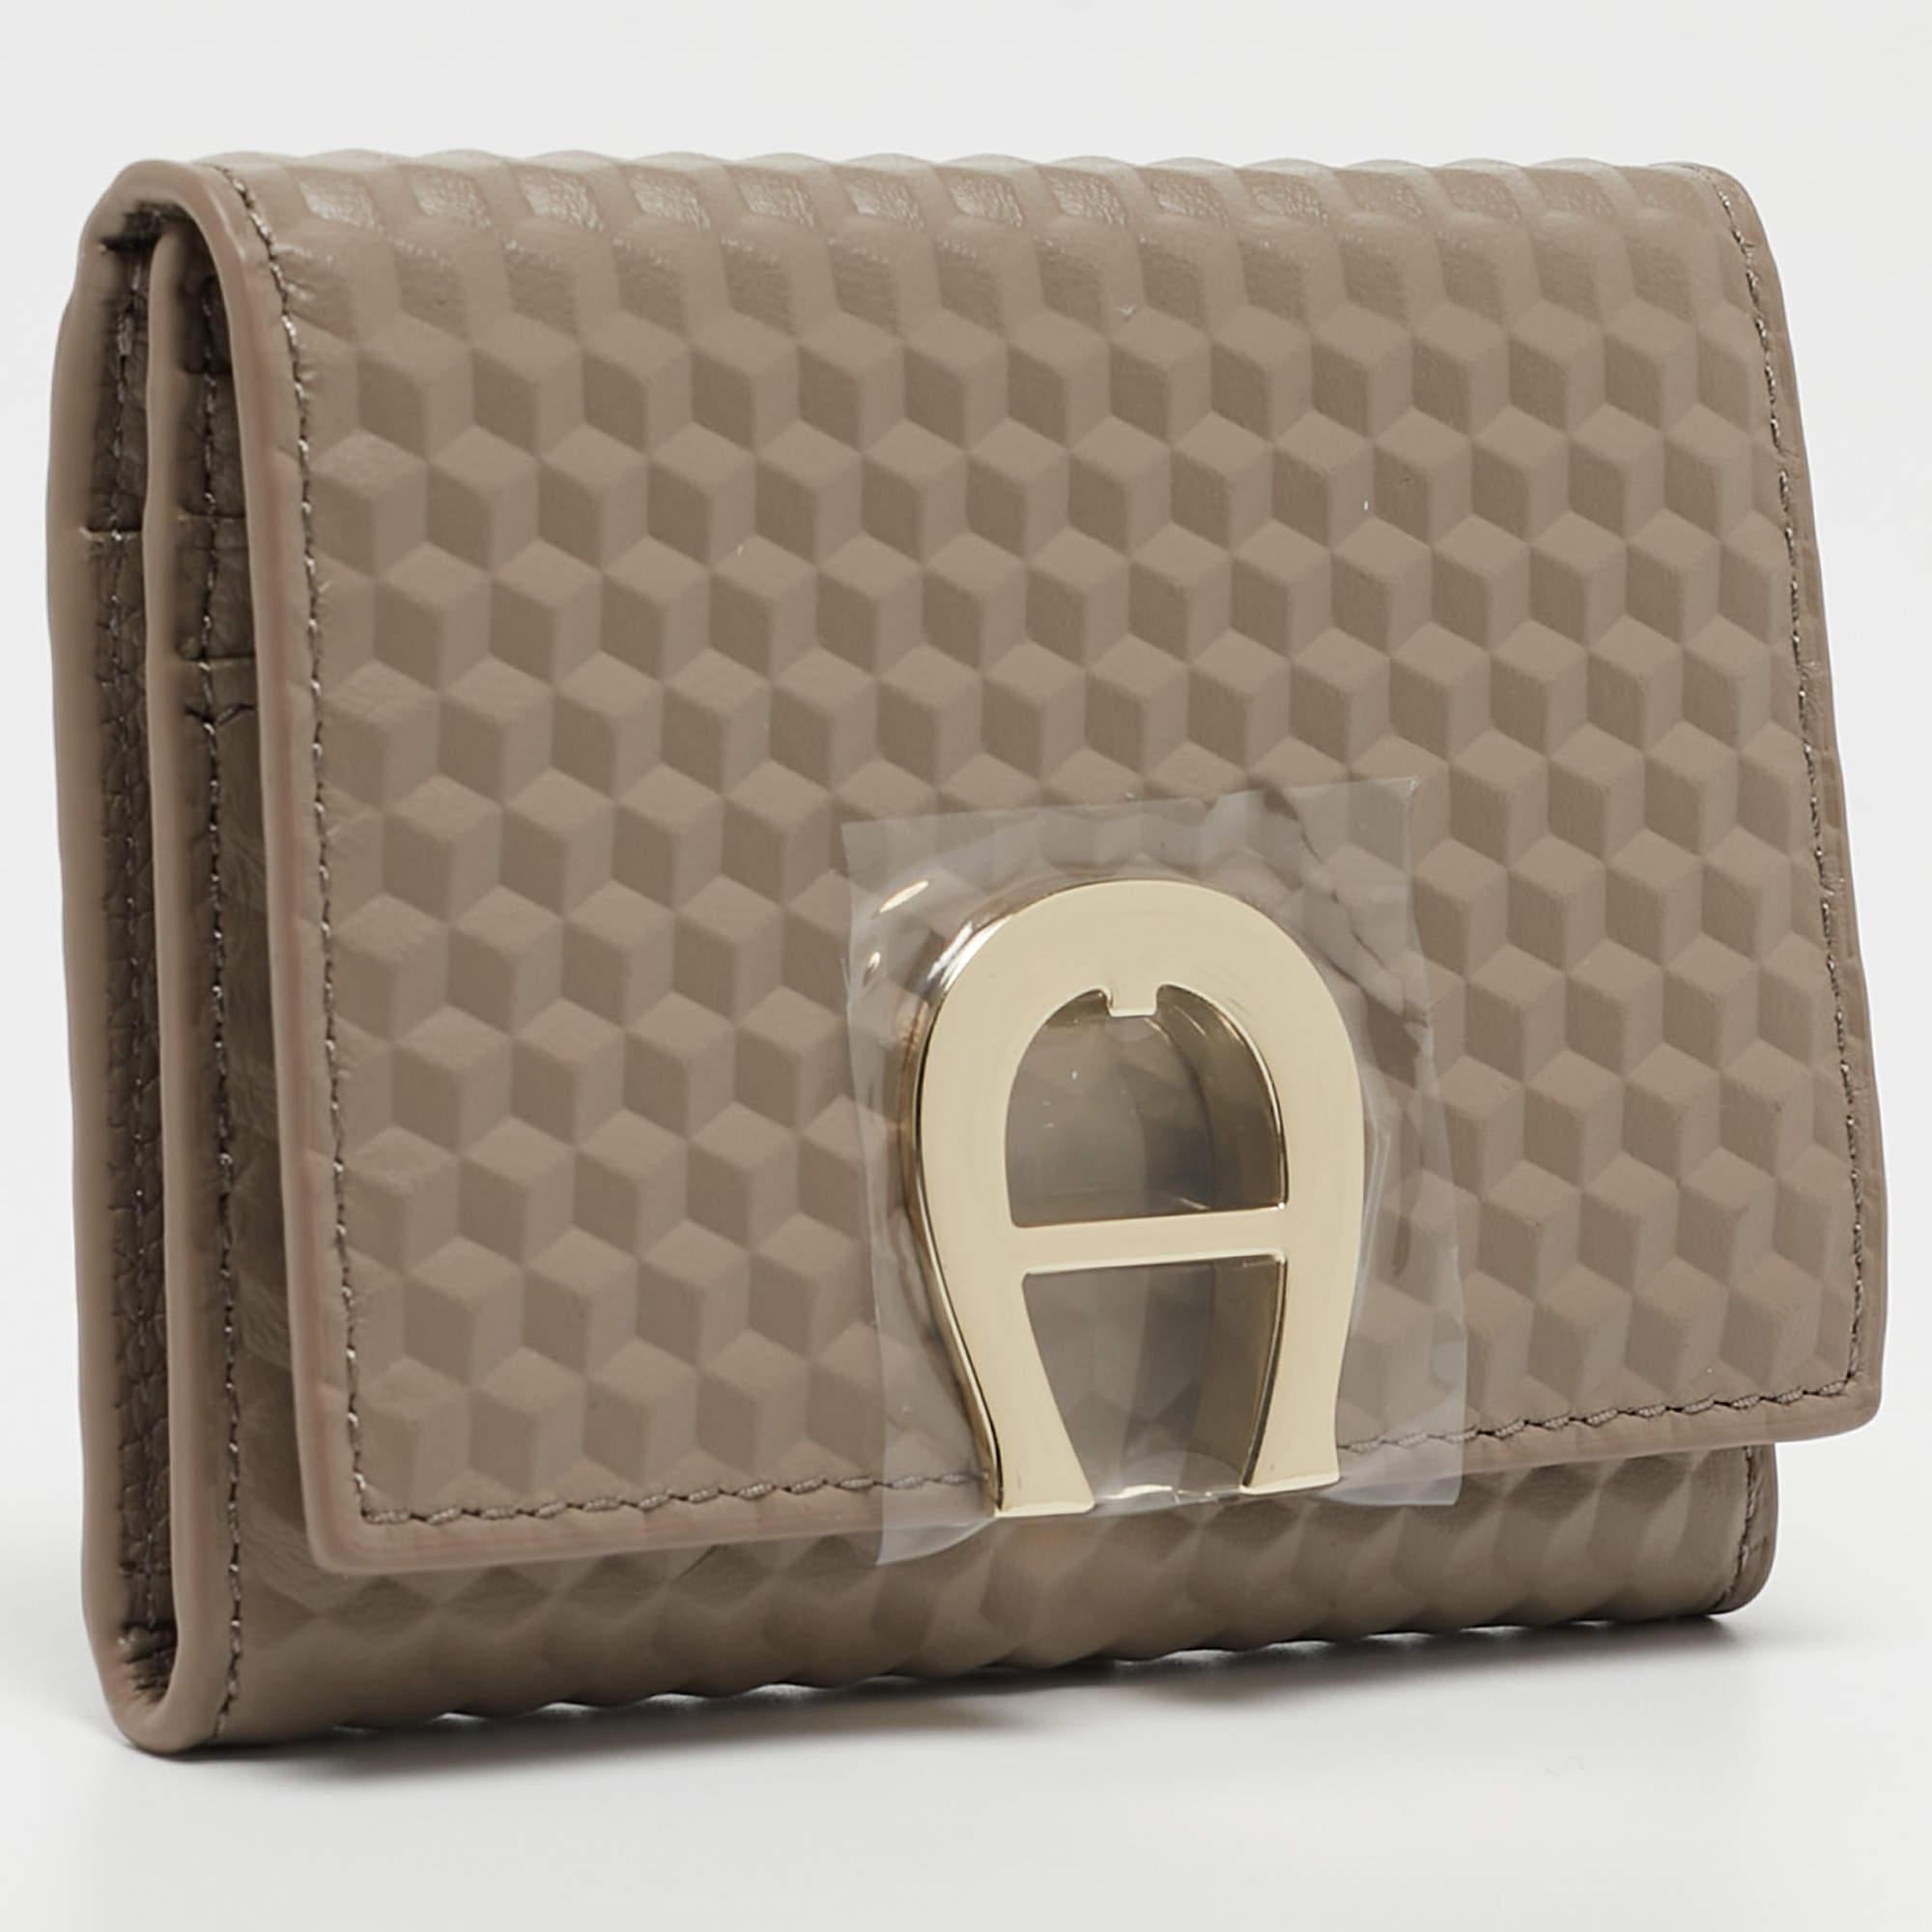 Aigner Beige Leather Pria Trifold Wallet 2